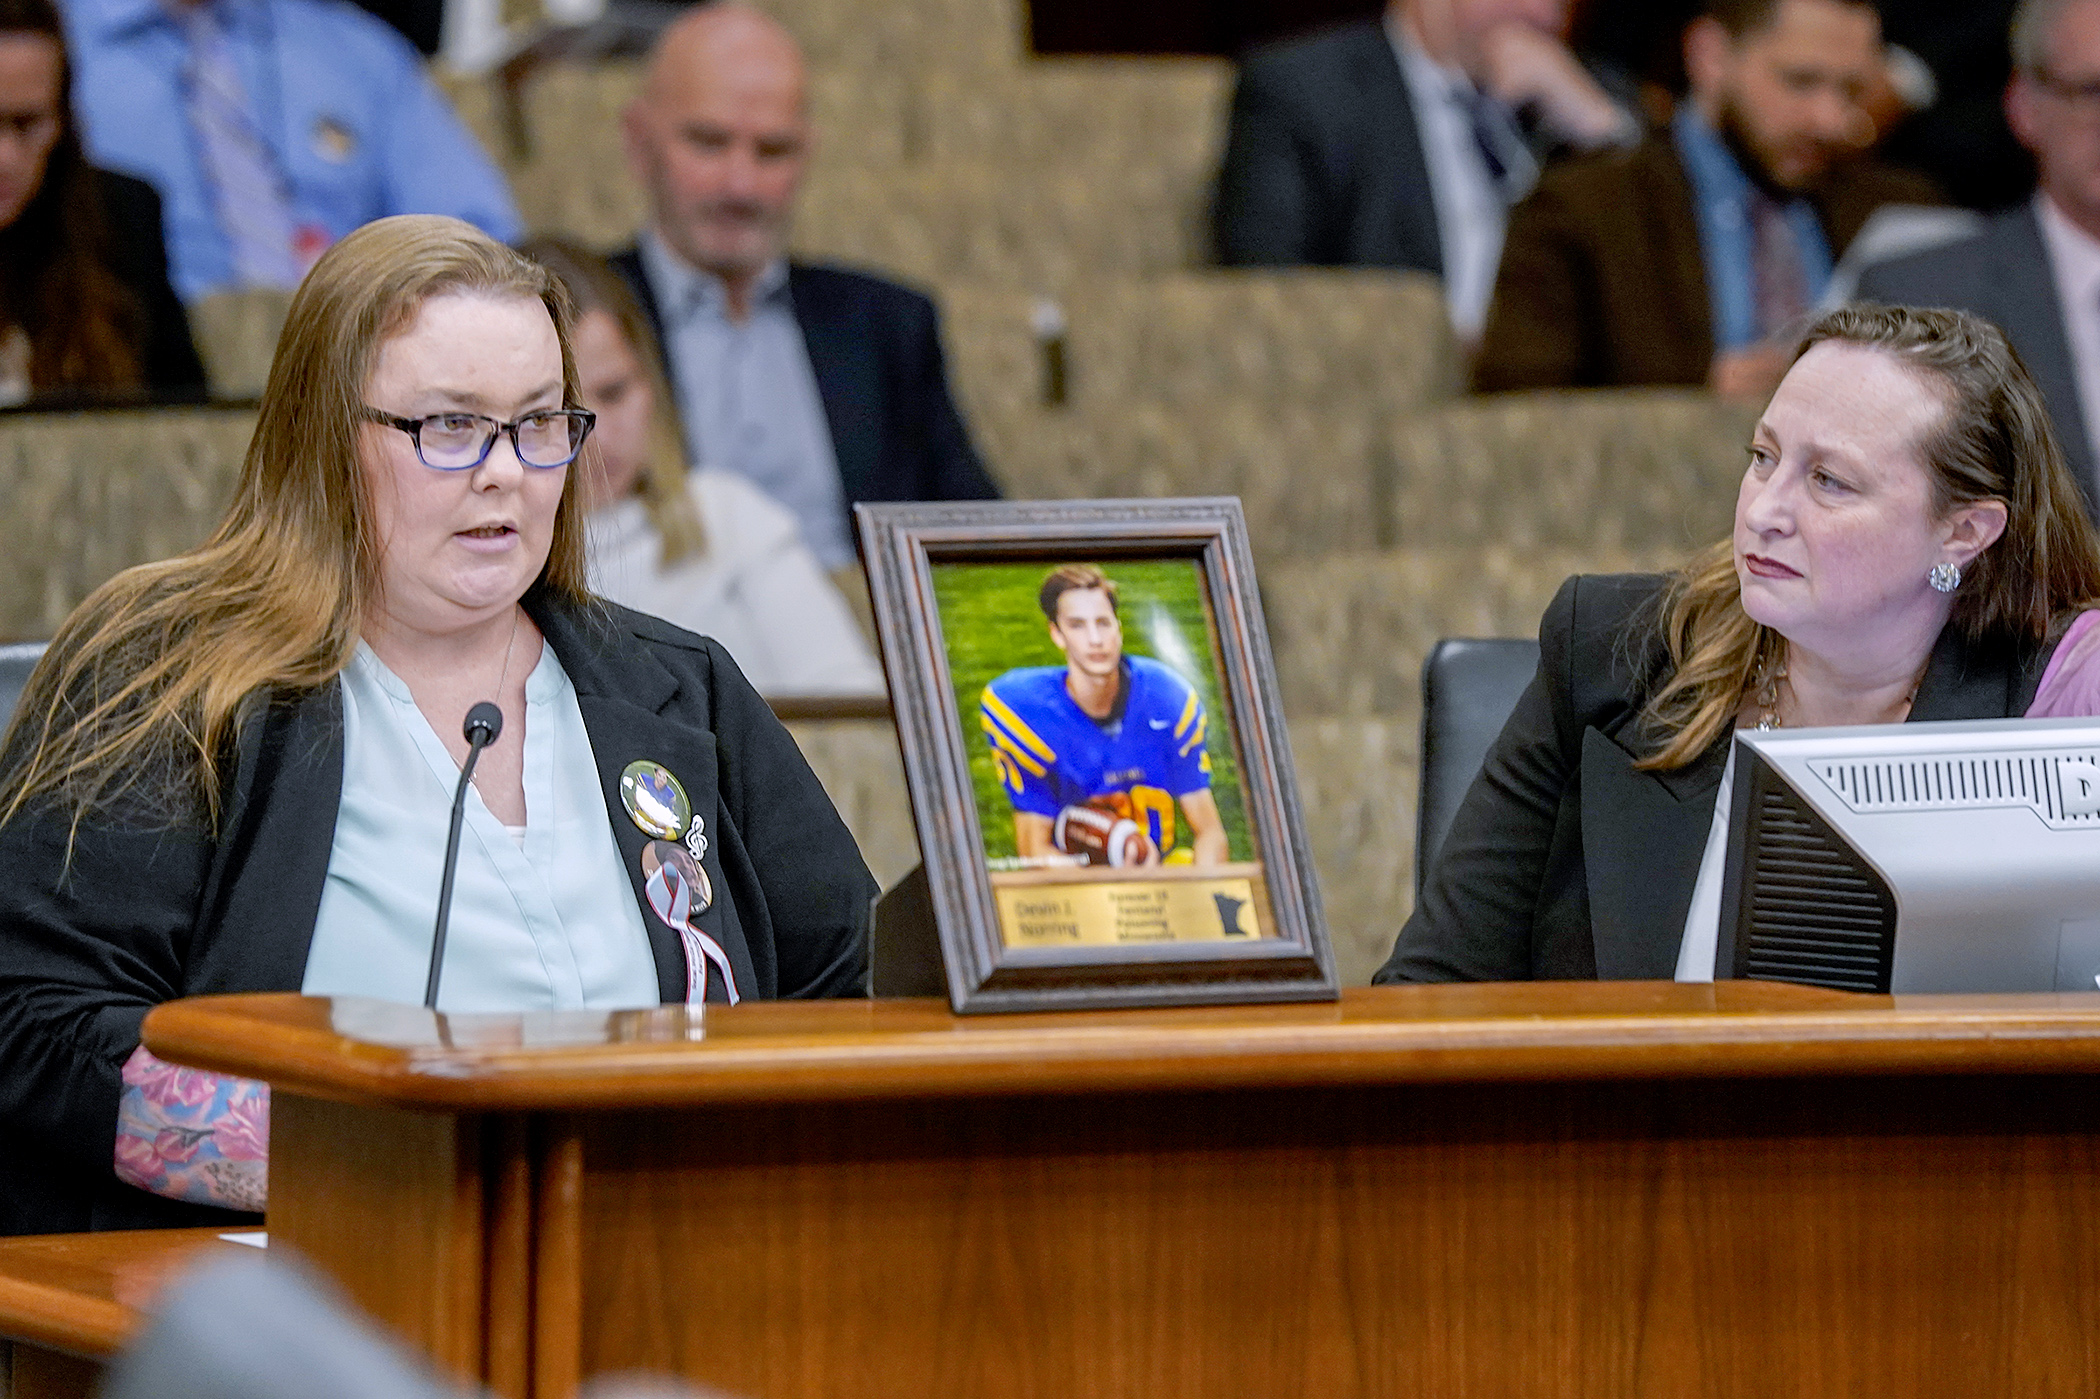 Bridgette Norring told lawmakers of her son, Devin, while testifying in support of HF2257. Devin died after purchasing a fentanyl pill through Snapchat he believed was Percocet. Rep. Kristin Bahner, right, sponsors the bill. (Photo by Michele Jokinen)